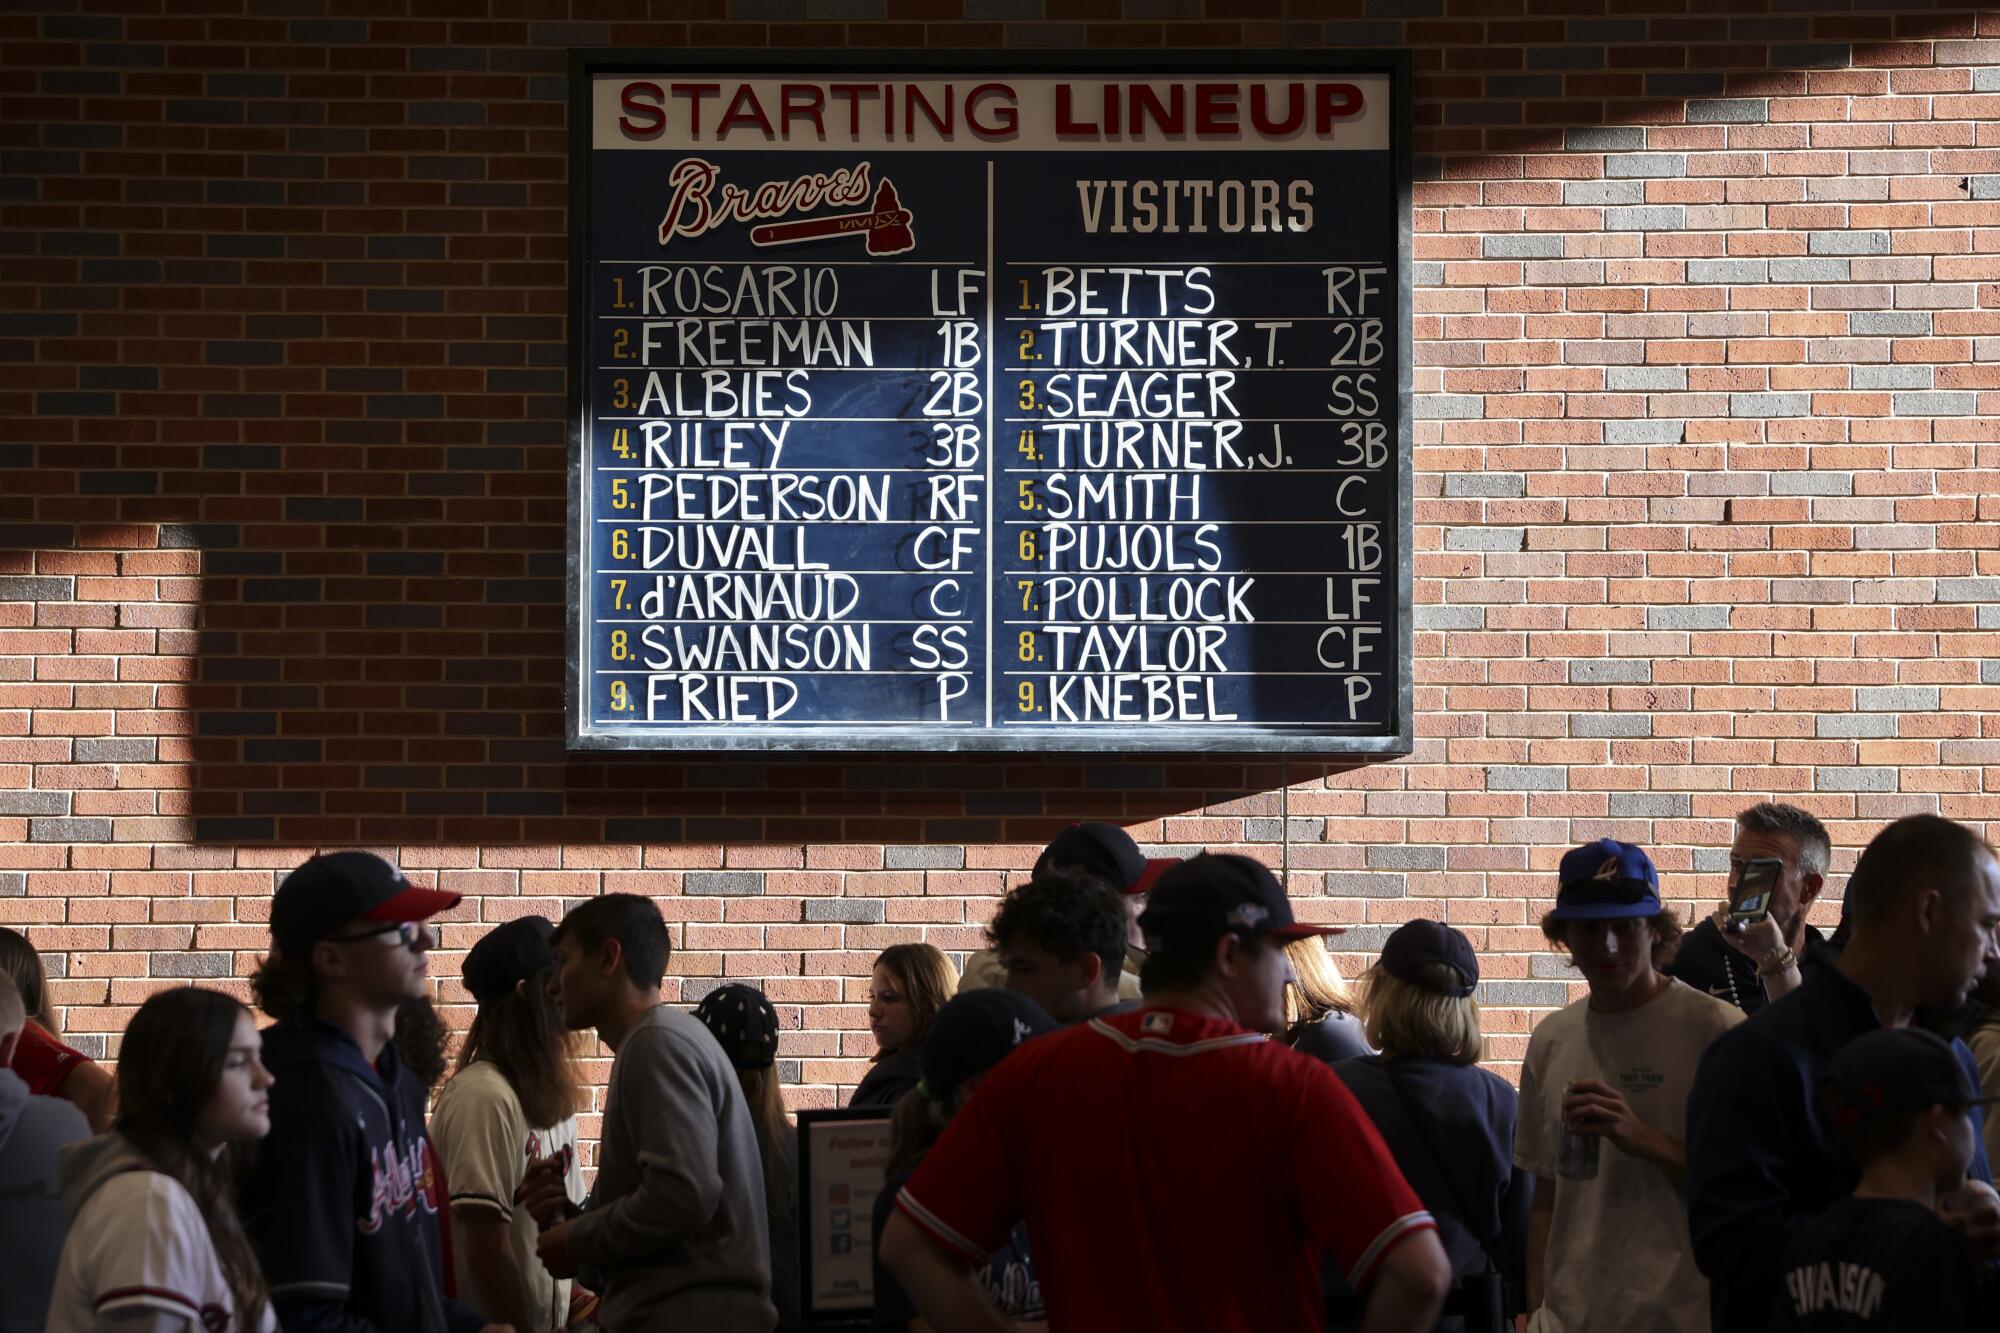 The starting lineups for the Los Angeles Dodgers and the Atlanta Braves is displayed for the fans before game one.